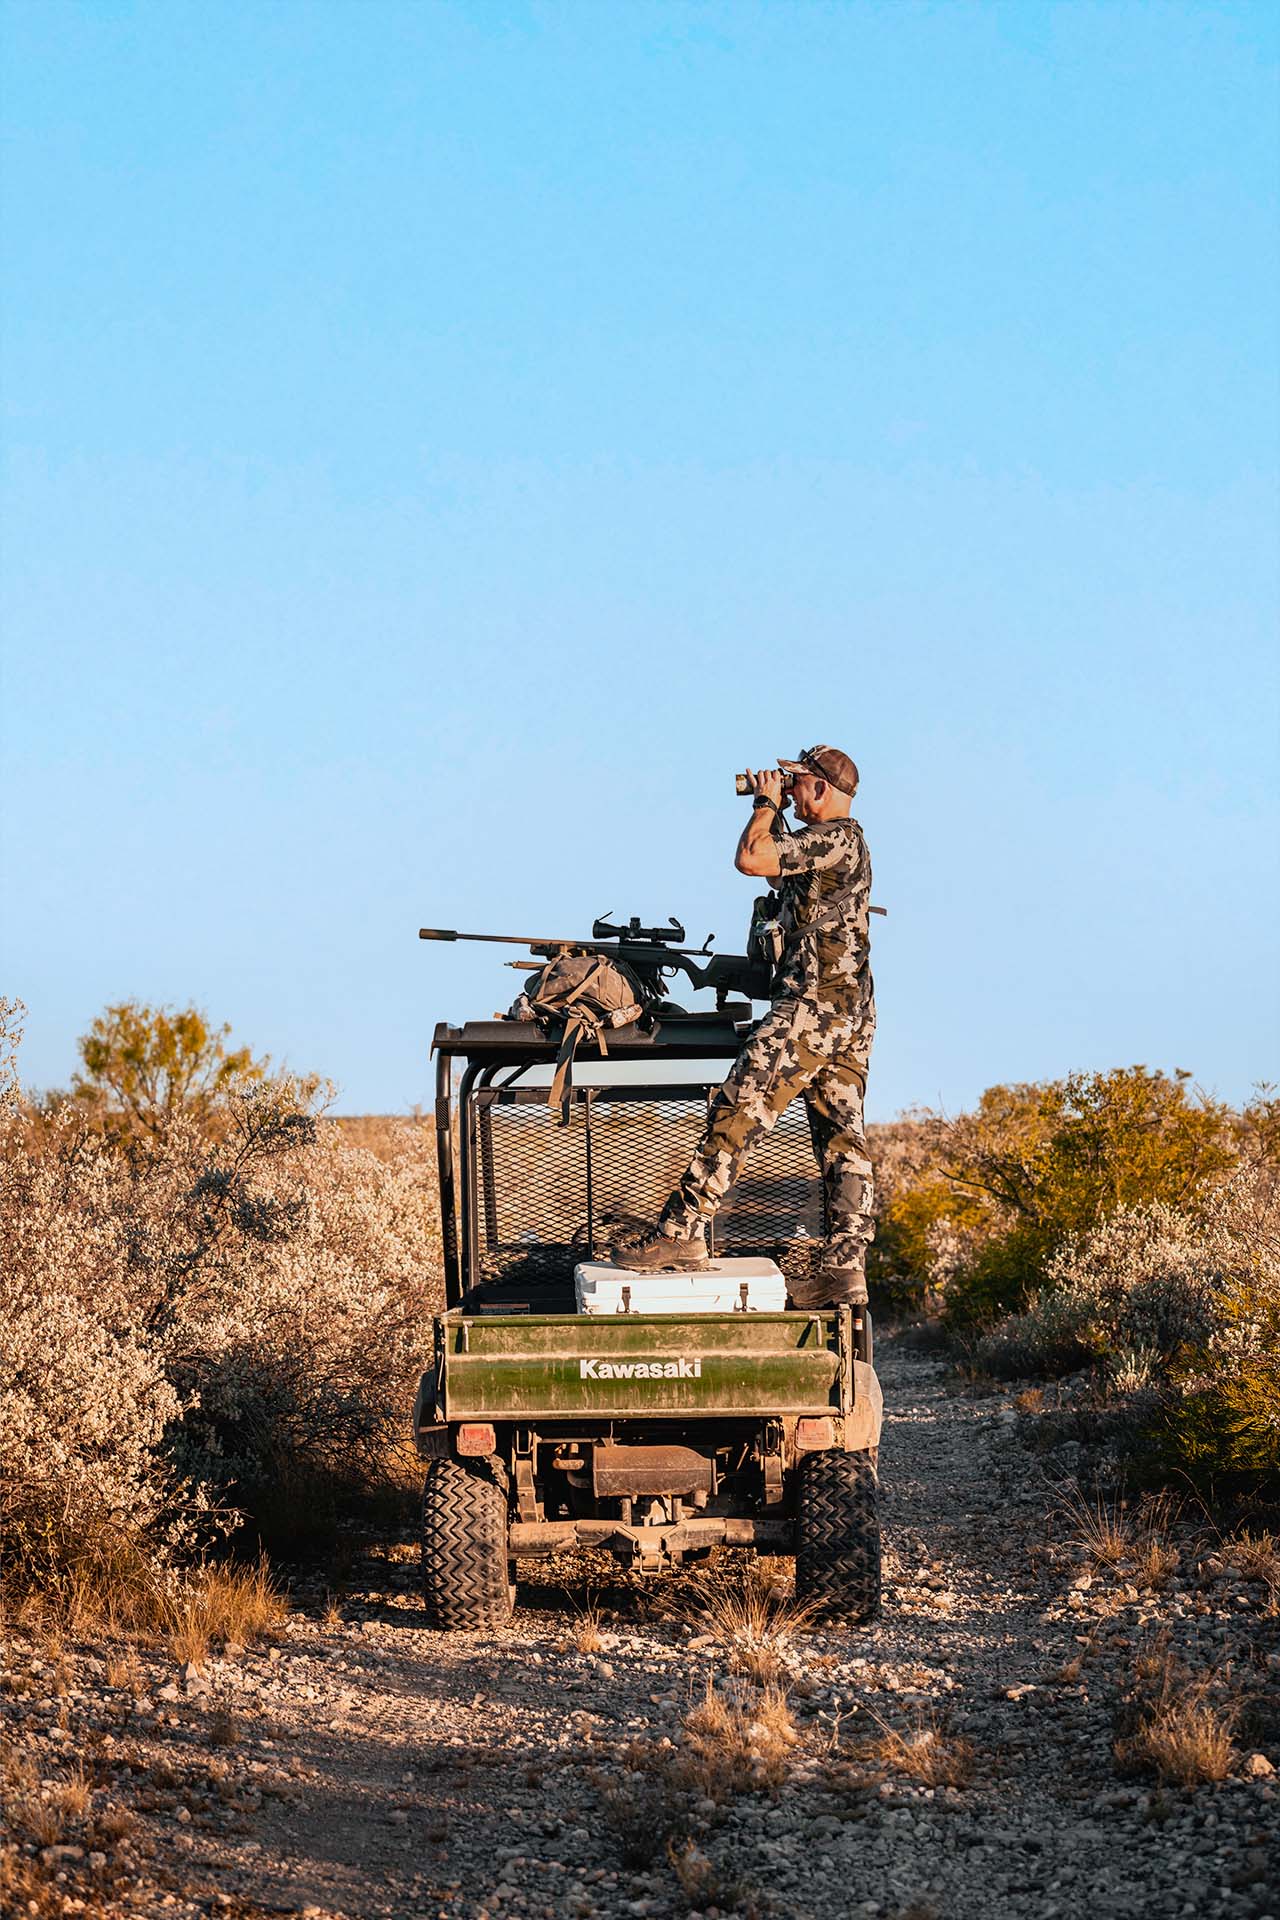 Glassing For Aoudad